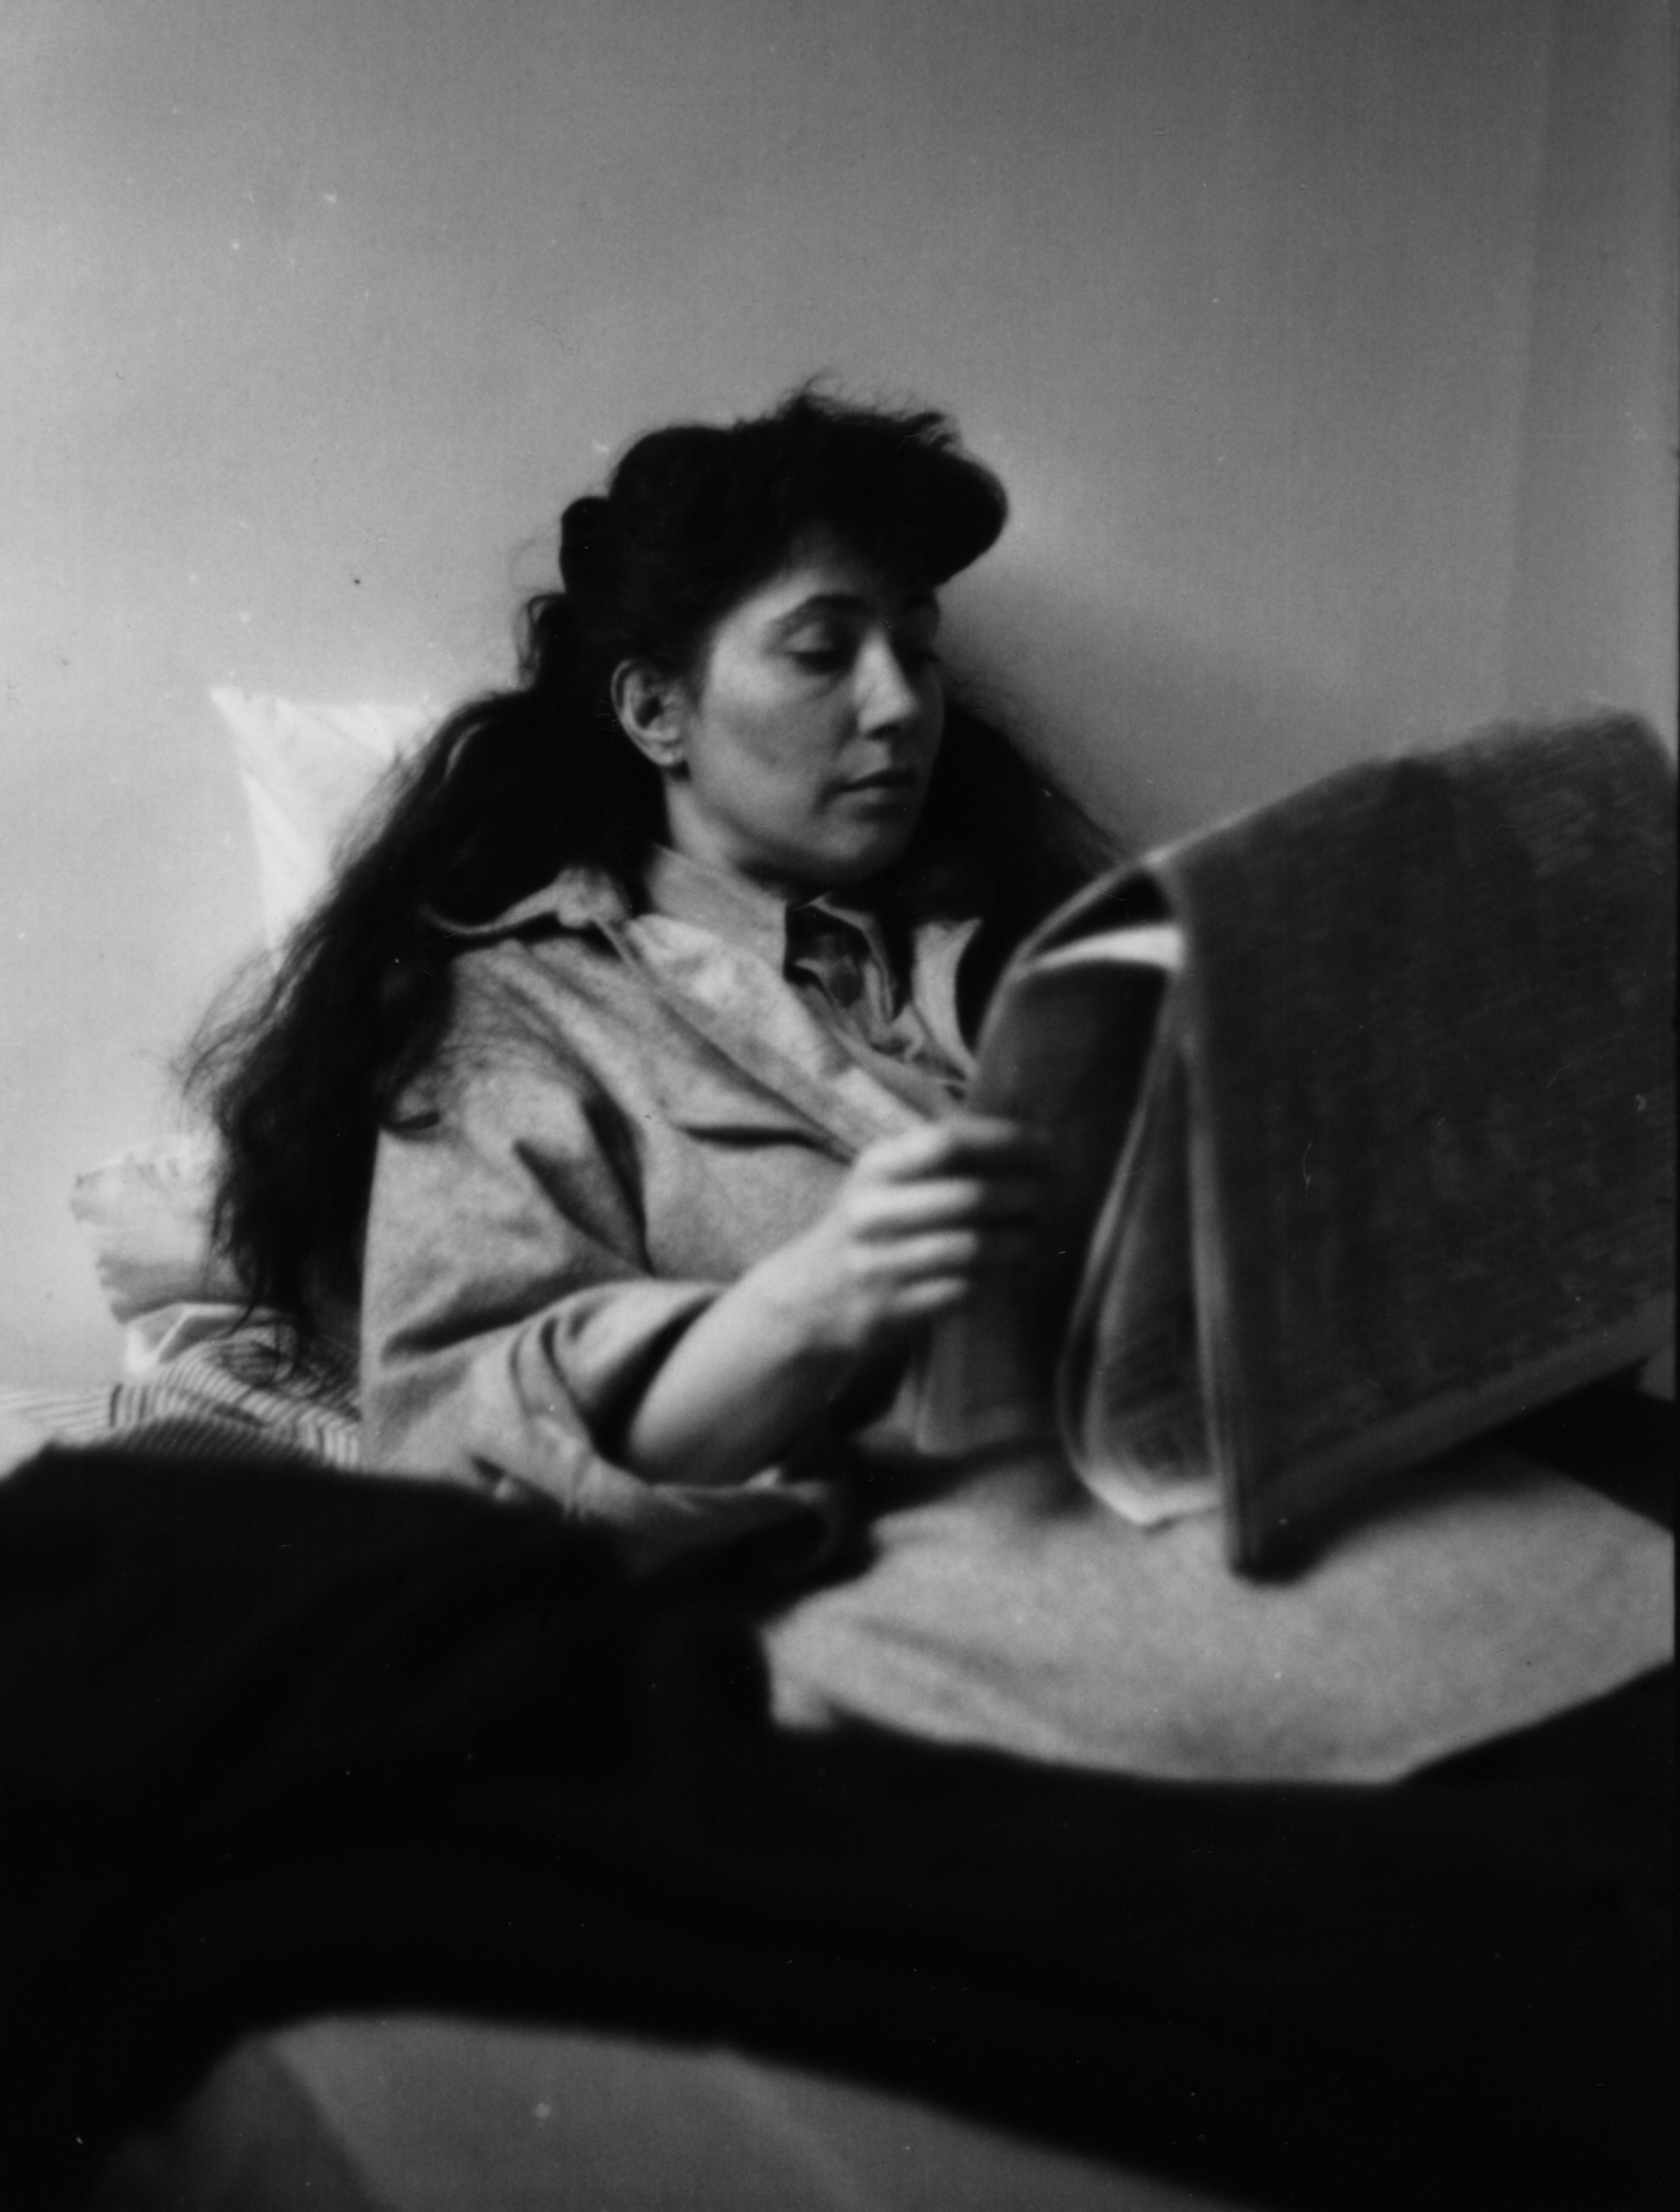 A black and white photograph of a young woman with long hair reading a newspaper in bed.